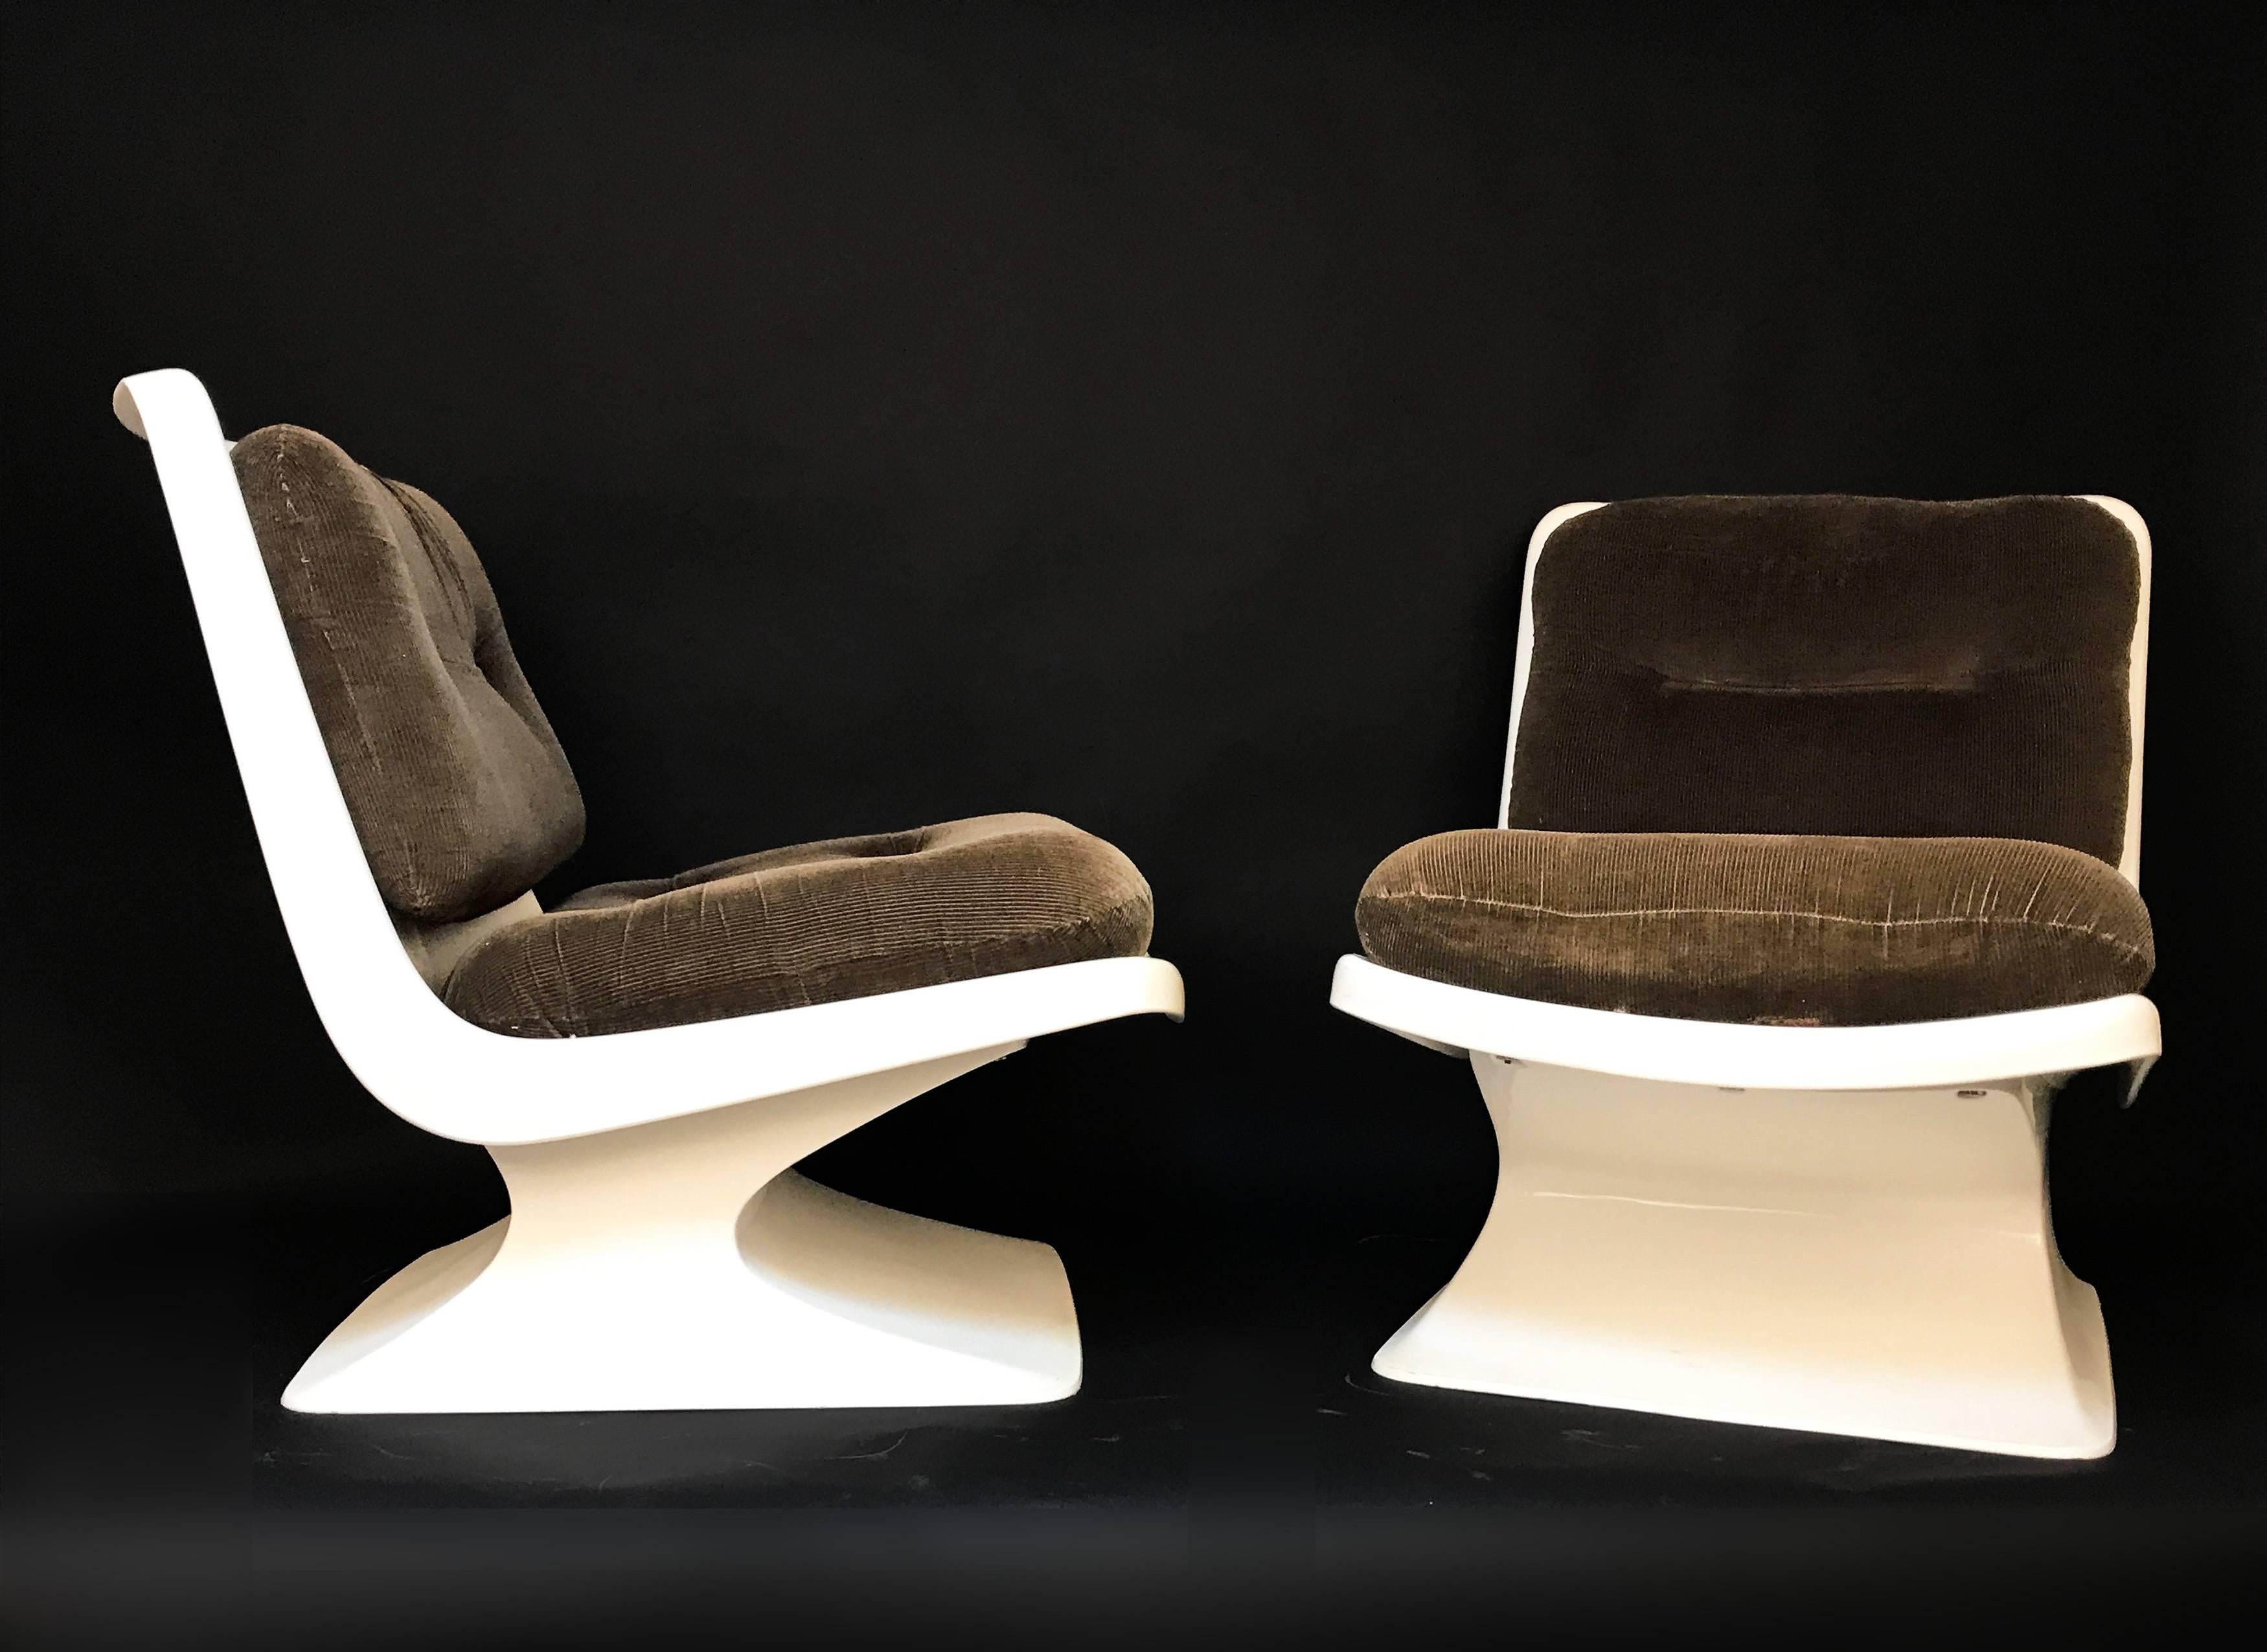 20th Century French Design Pair of Lounge Chair by Albert Jacob Grosfillex Space Age, 1970s